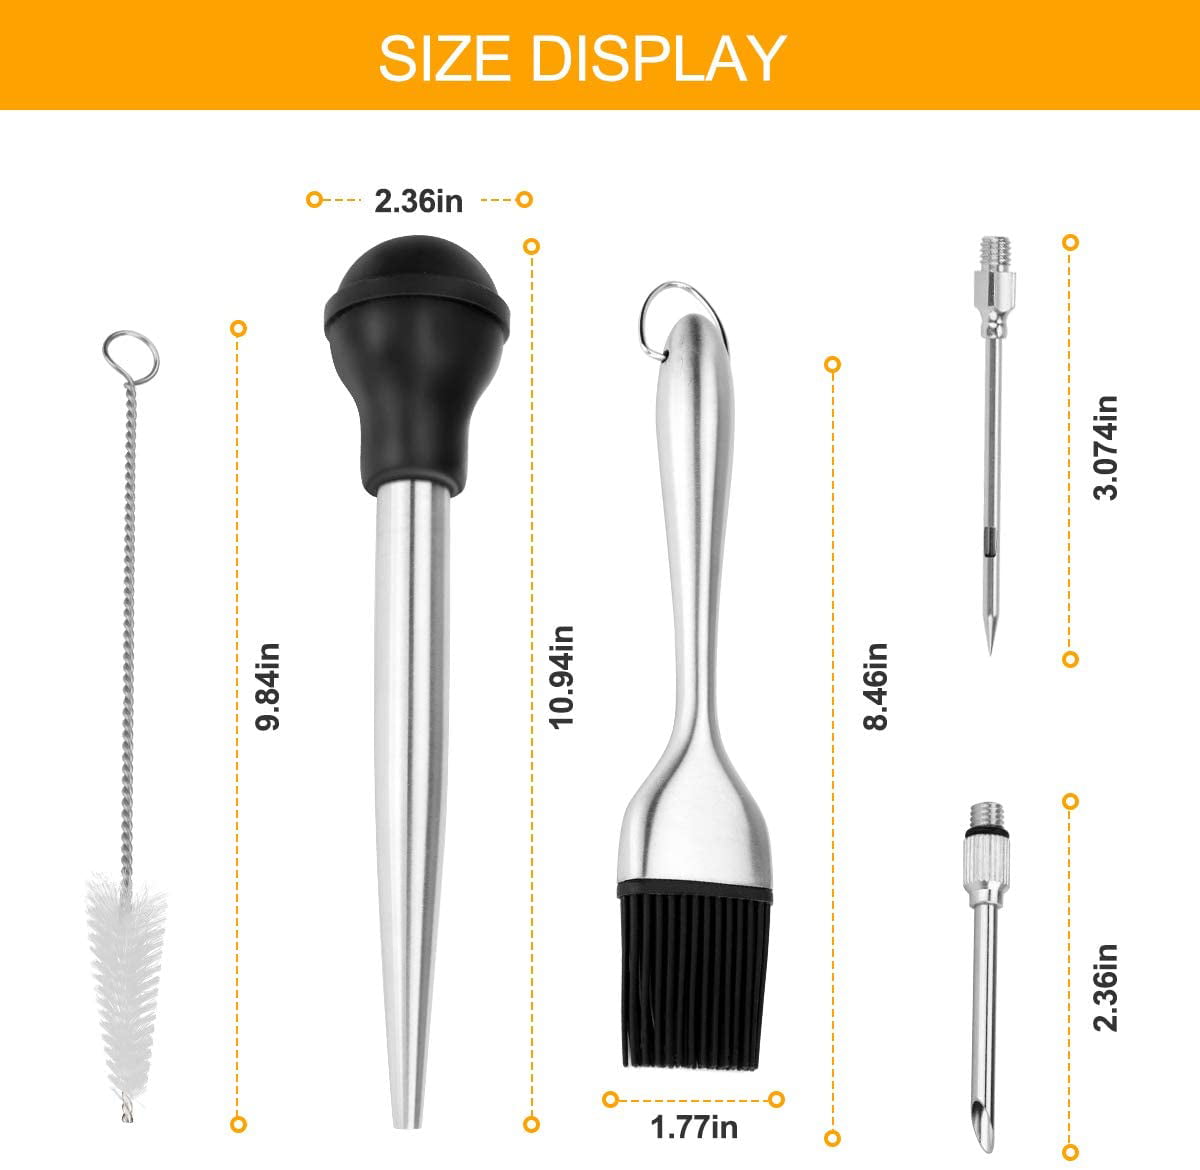 Stainless Steel Turkey Baster Set of 4 Black Flavor Needle and Cleaning Brush